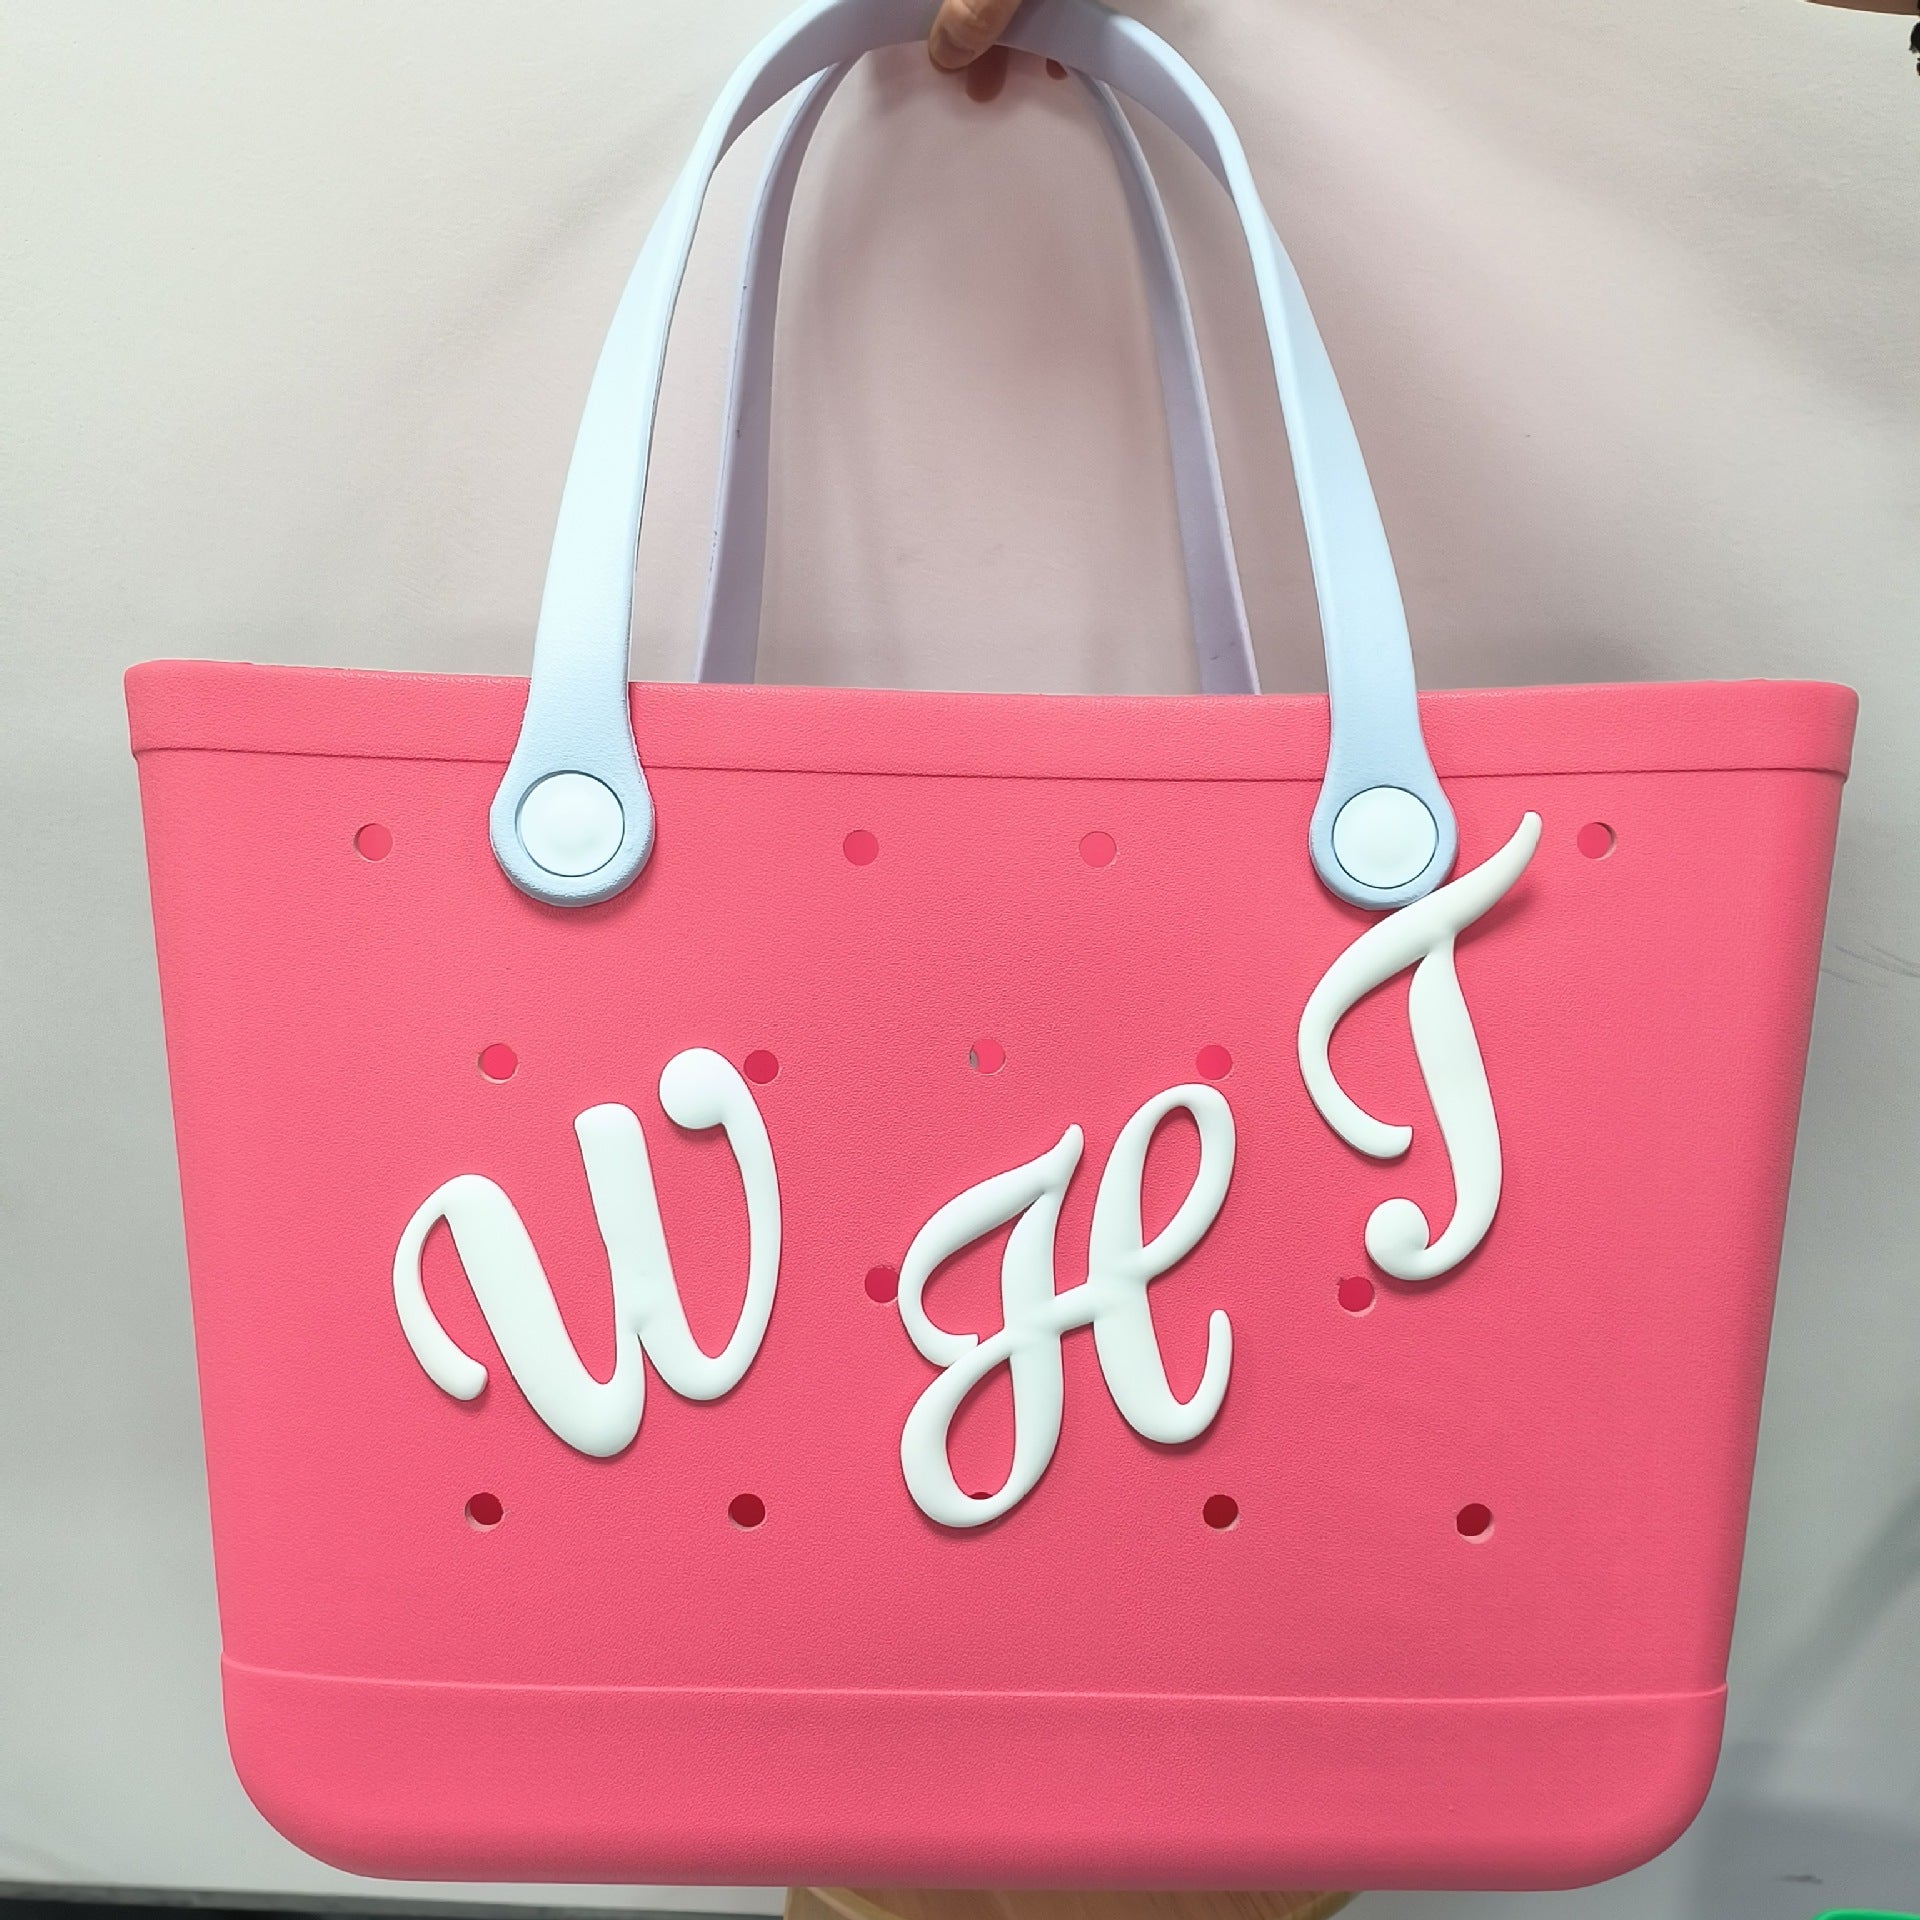 3D letter to personalize your women's beach tote bag